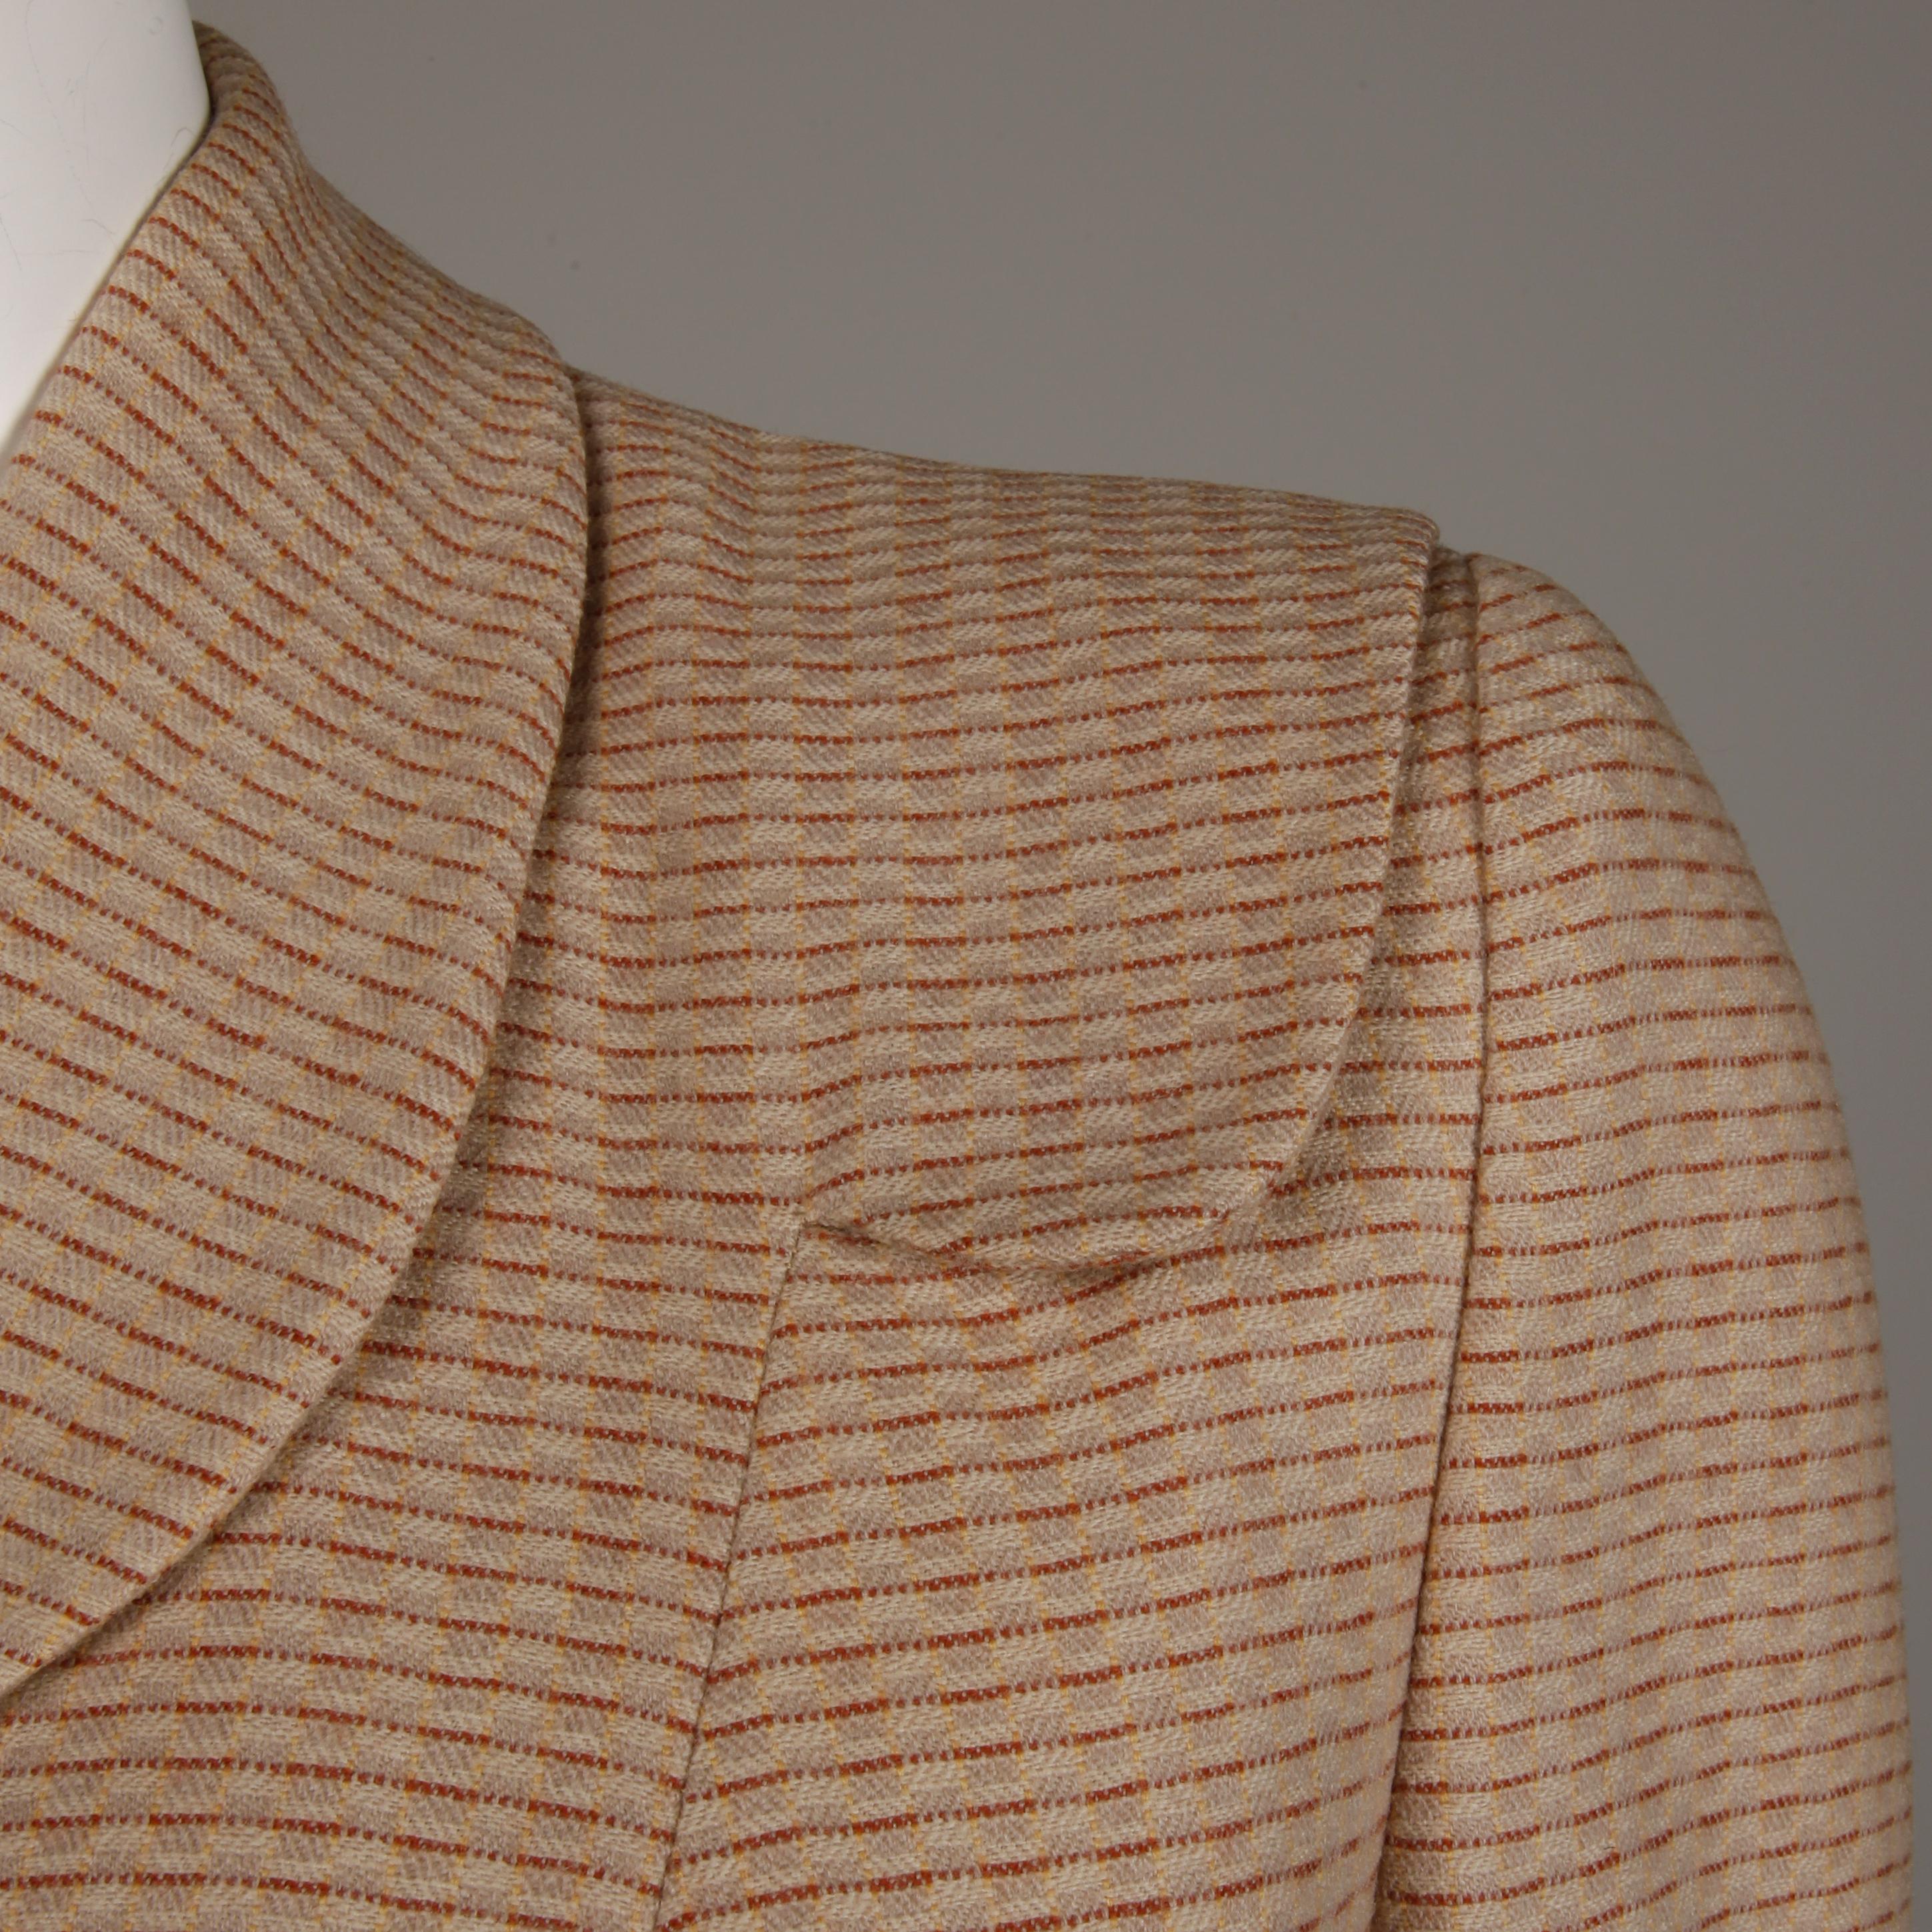 Darling vintage early-1950s blazer jacket in a beige and brown woven wool. Fully lined with front button closure. Light shoulder pads are sewn in underneath the lining. This has a junior label and will fit a modern XS. The bust measures 33